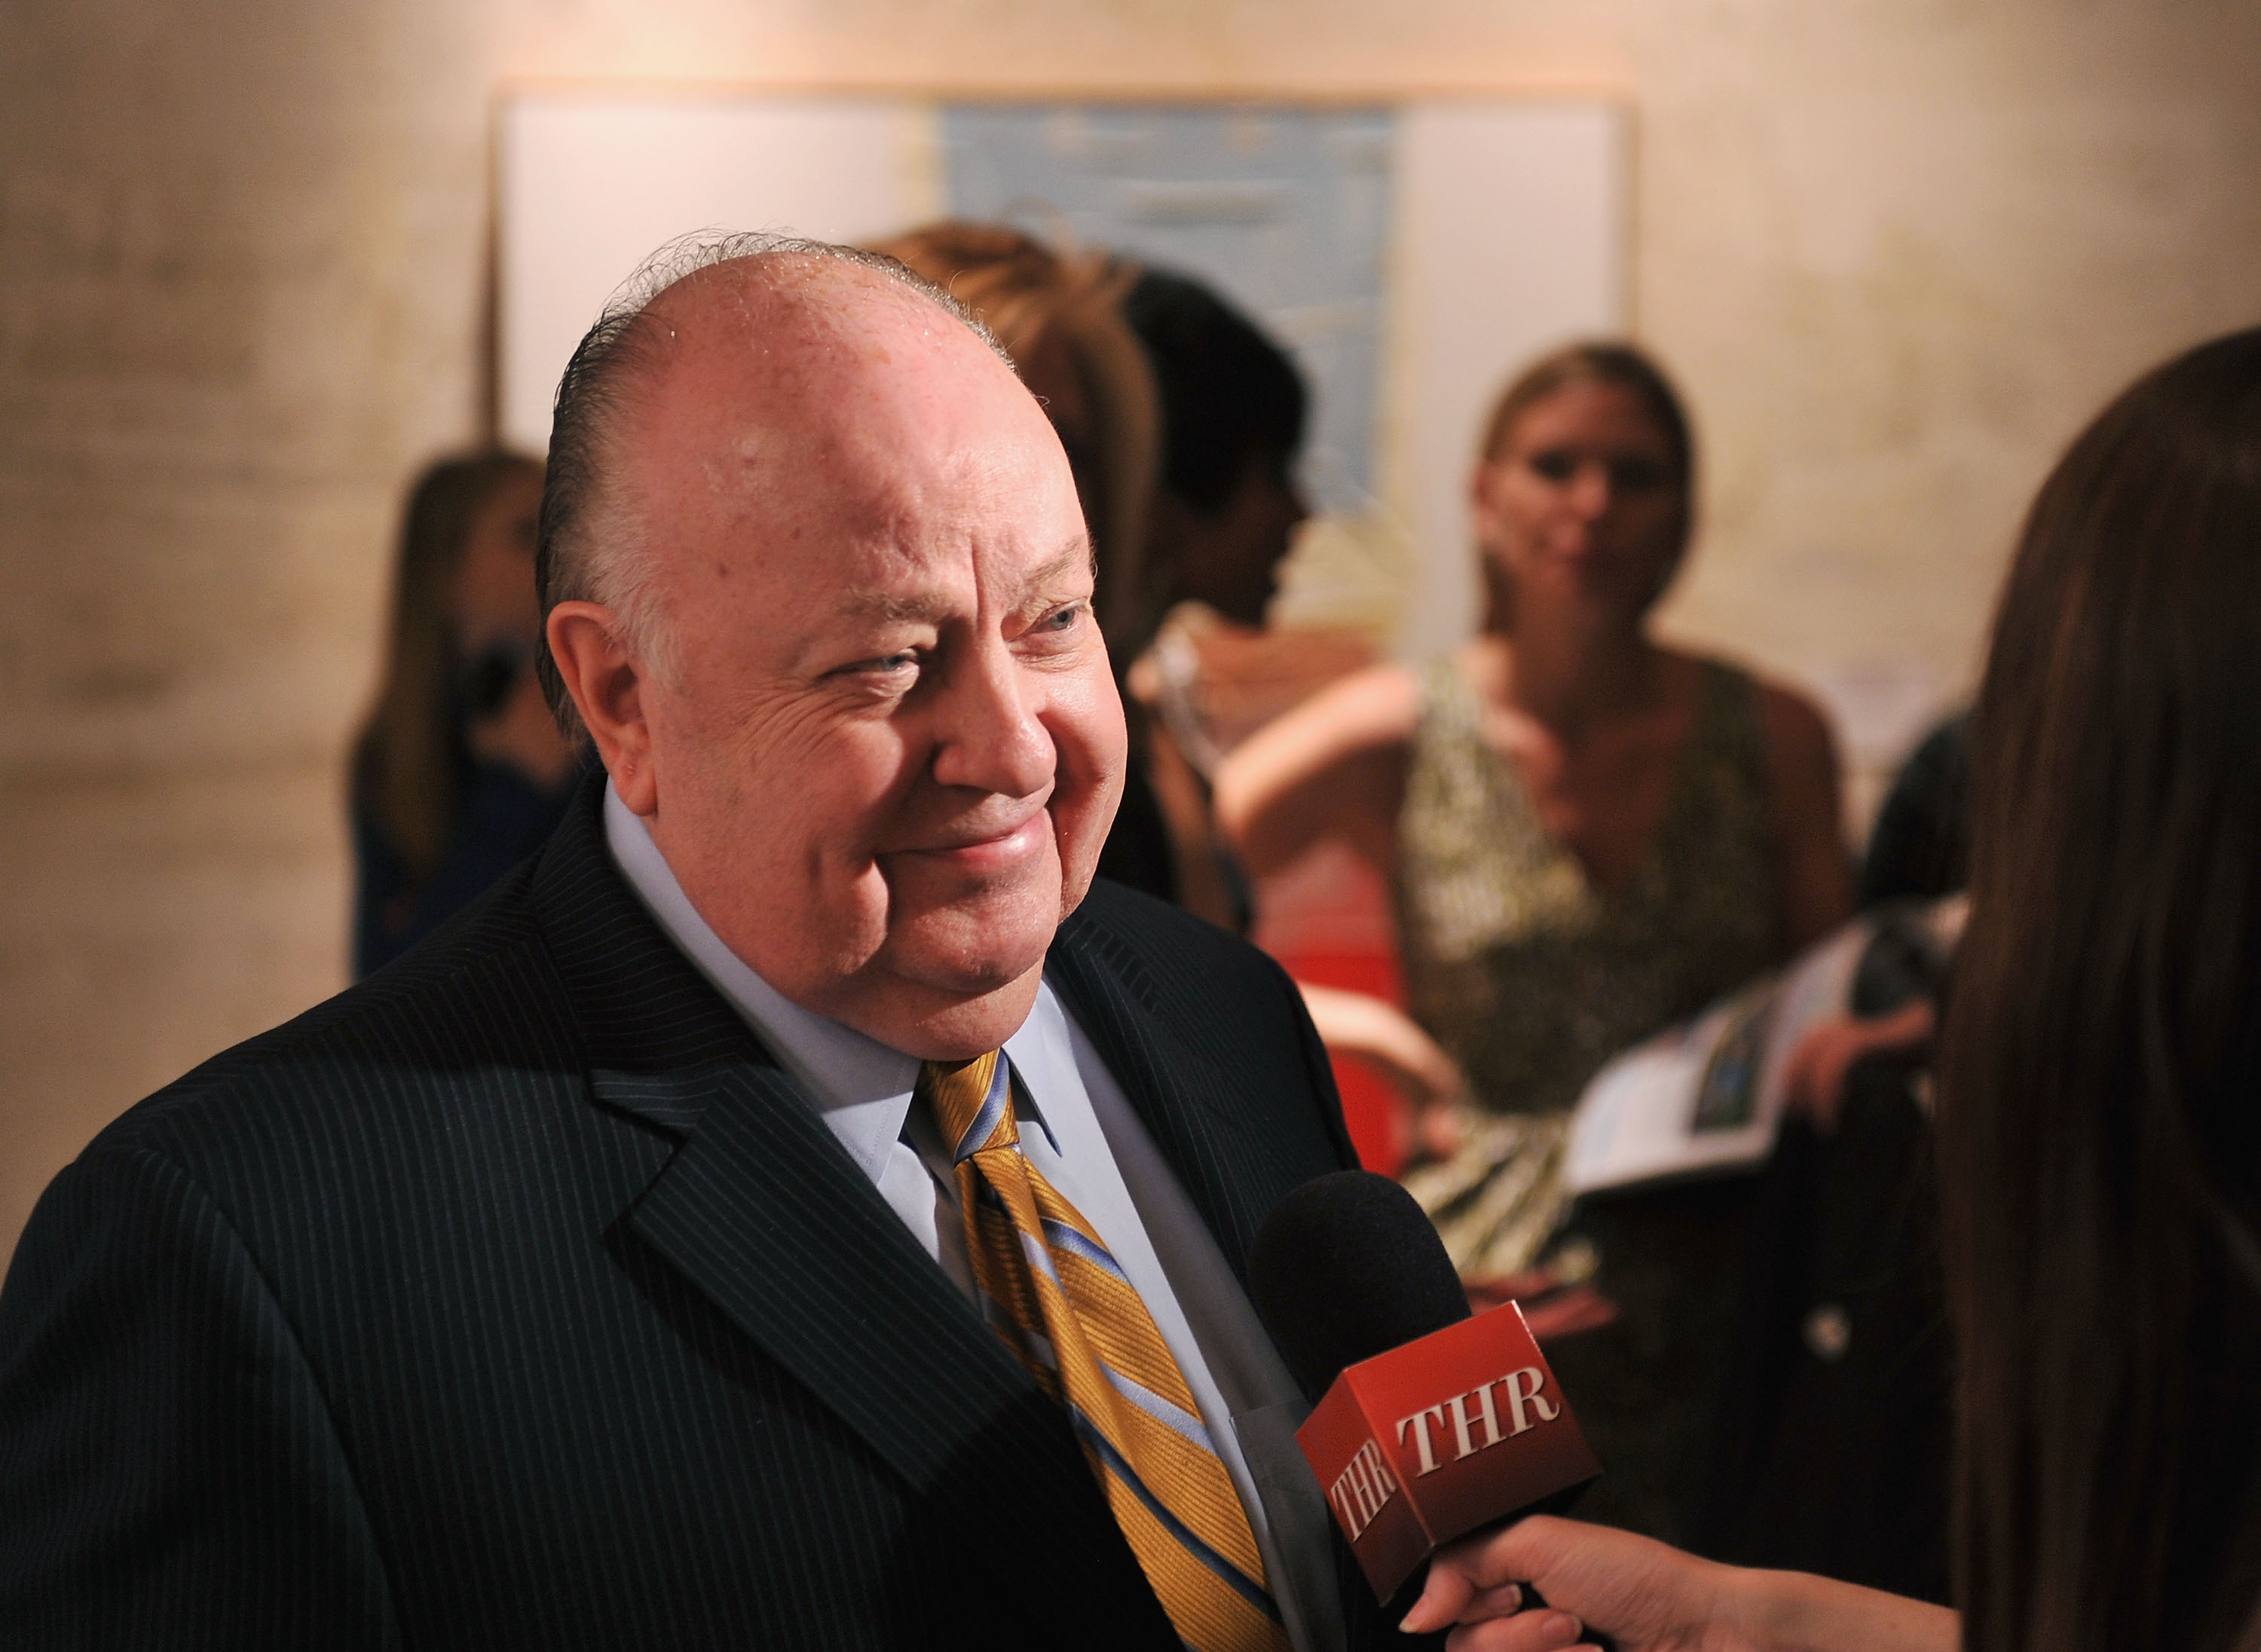 Roger Ailes, President of Fox News Channel attends the Hollywood Reporter celebration of "The 35 Most Powerful People in Media" at the Four Season Grill Room on April 11, 2012 in New York City. (Stephen Lovekin—Getty Images)